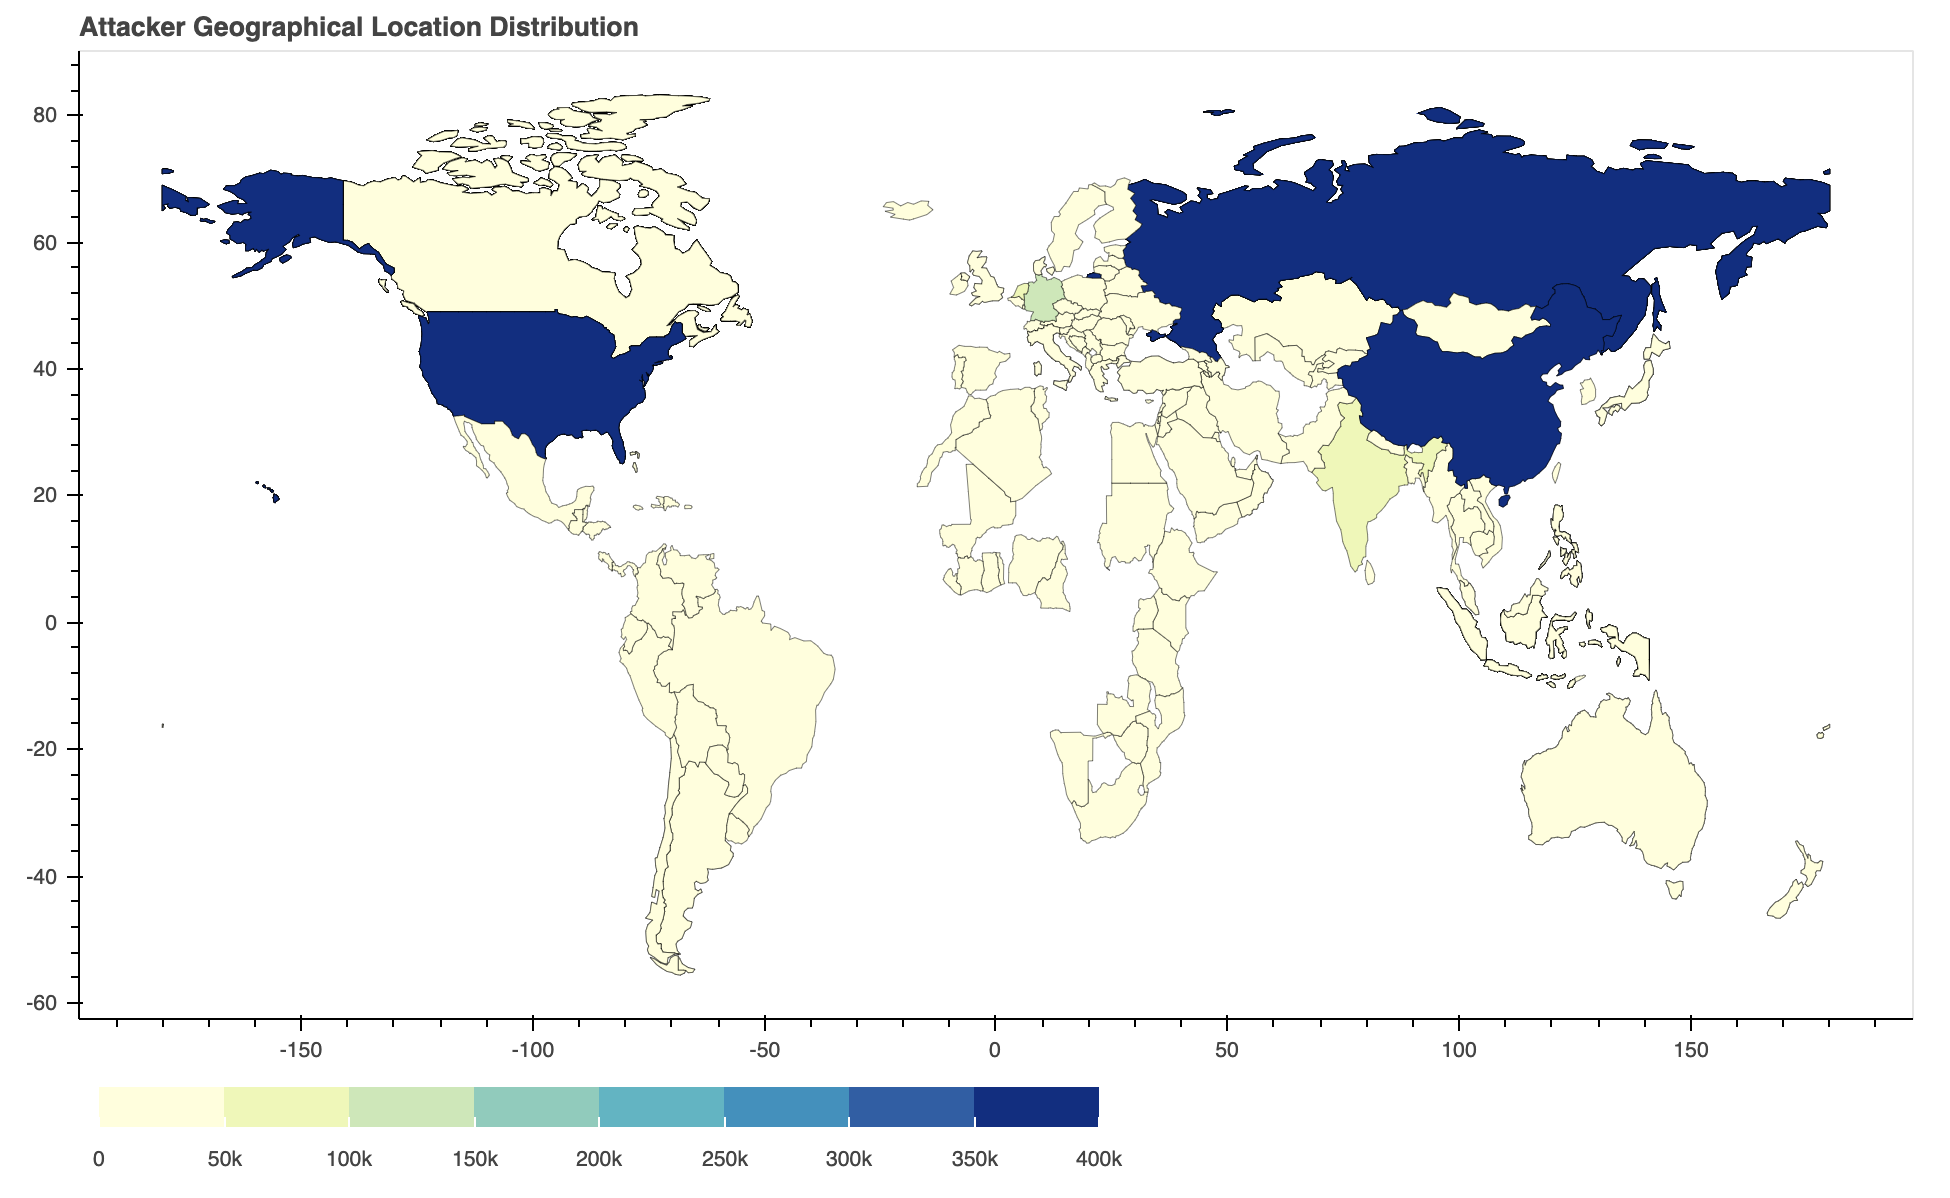 The image depicts a map with the title, "Attacker Geographical Location Distribution." Shaded regions highlight the top countries (Russian, United States, and China). 